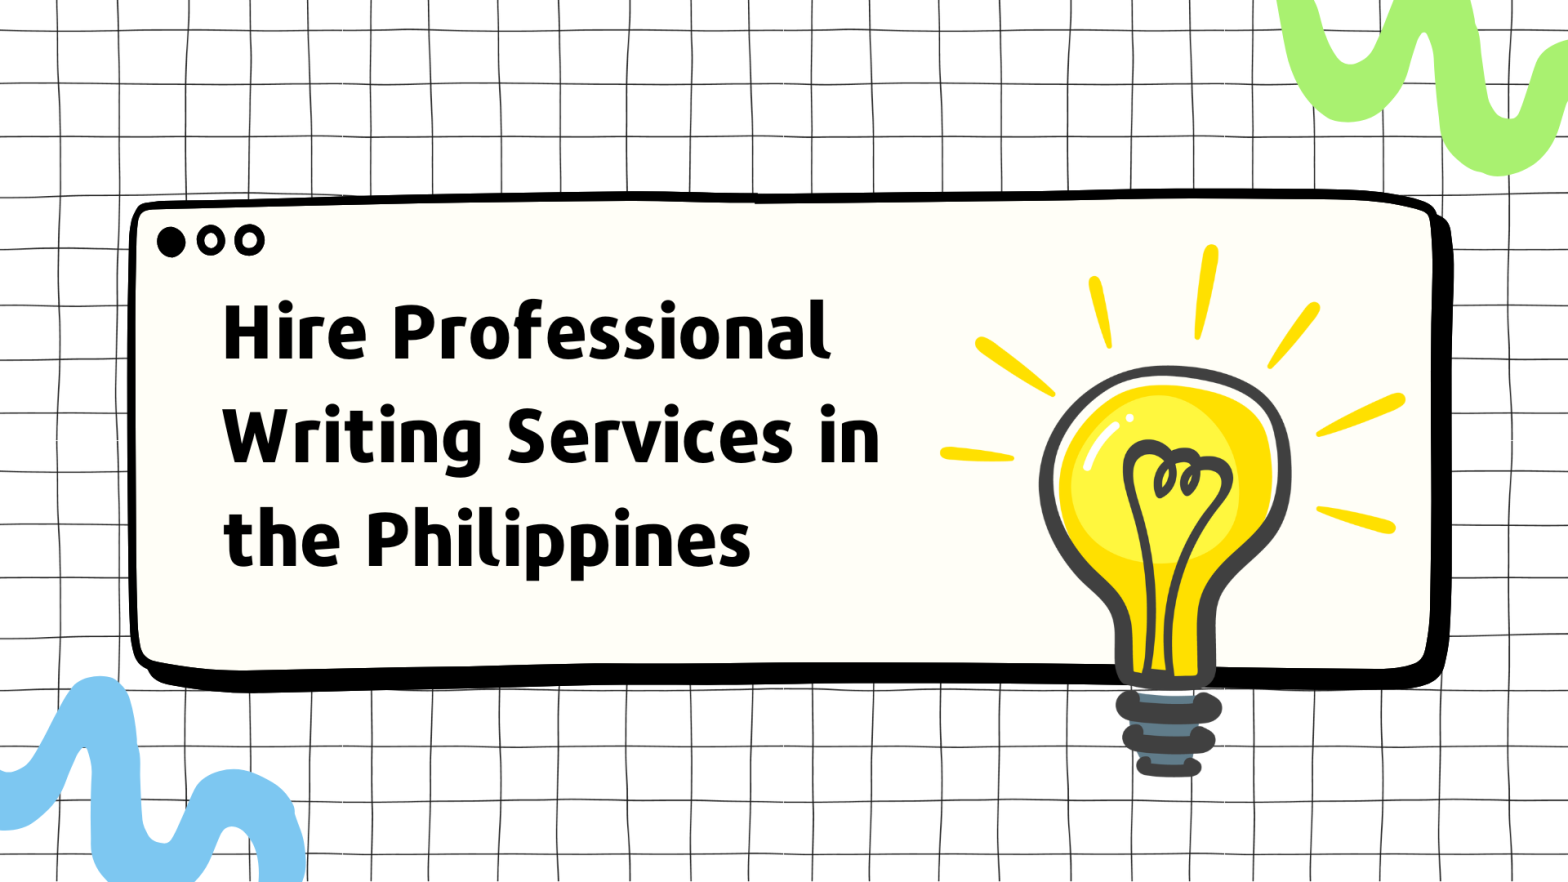 Hire Professional Writing Services in the Philippines